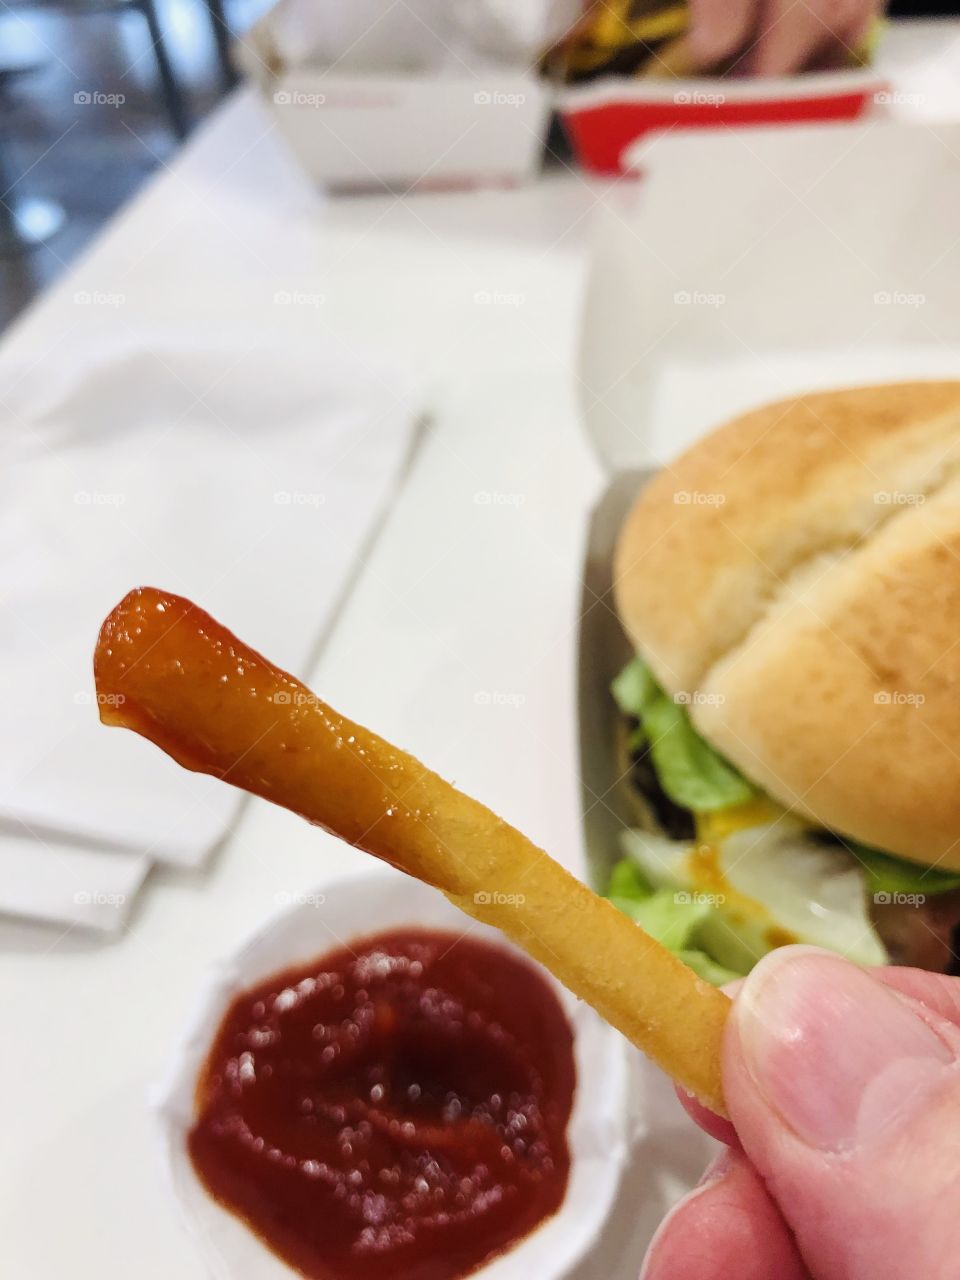 This is my favourite thing to do at McDonald’s ‘ dipping my fry’s in ketchup 🤪